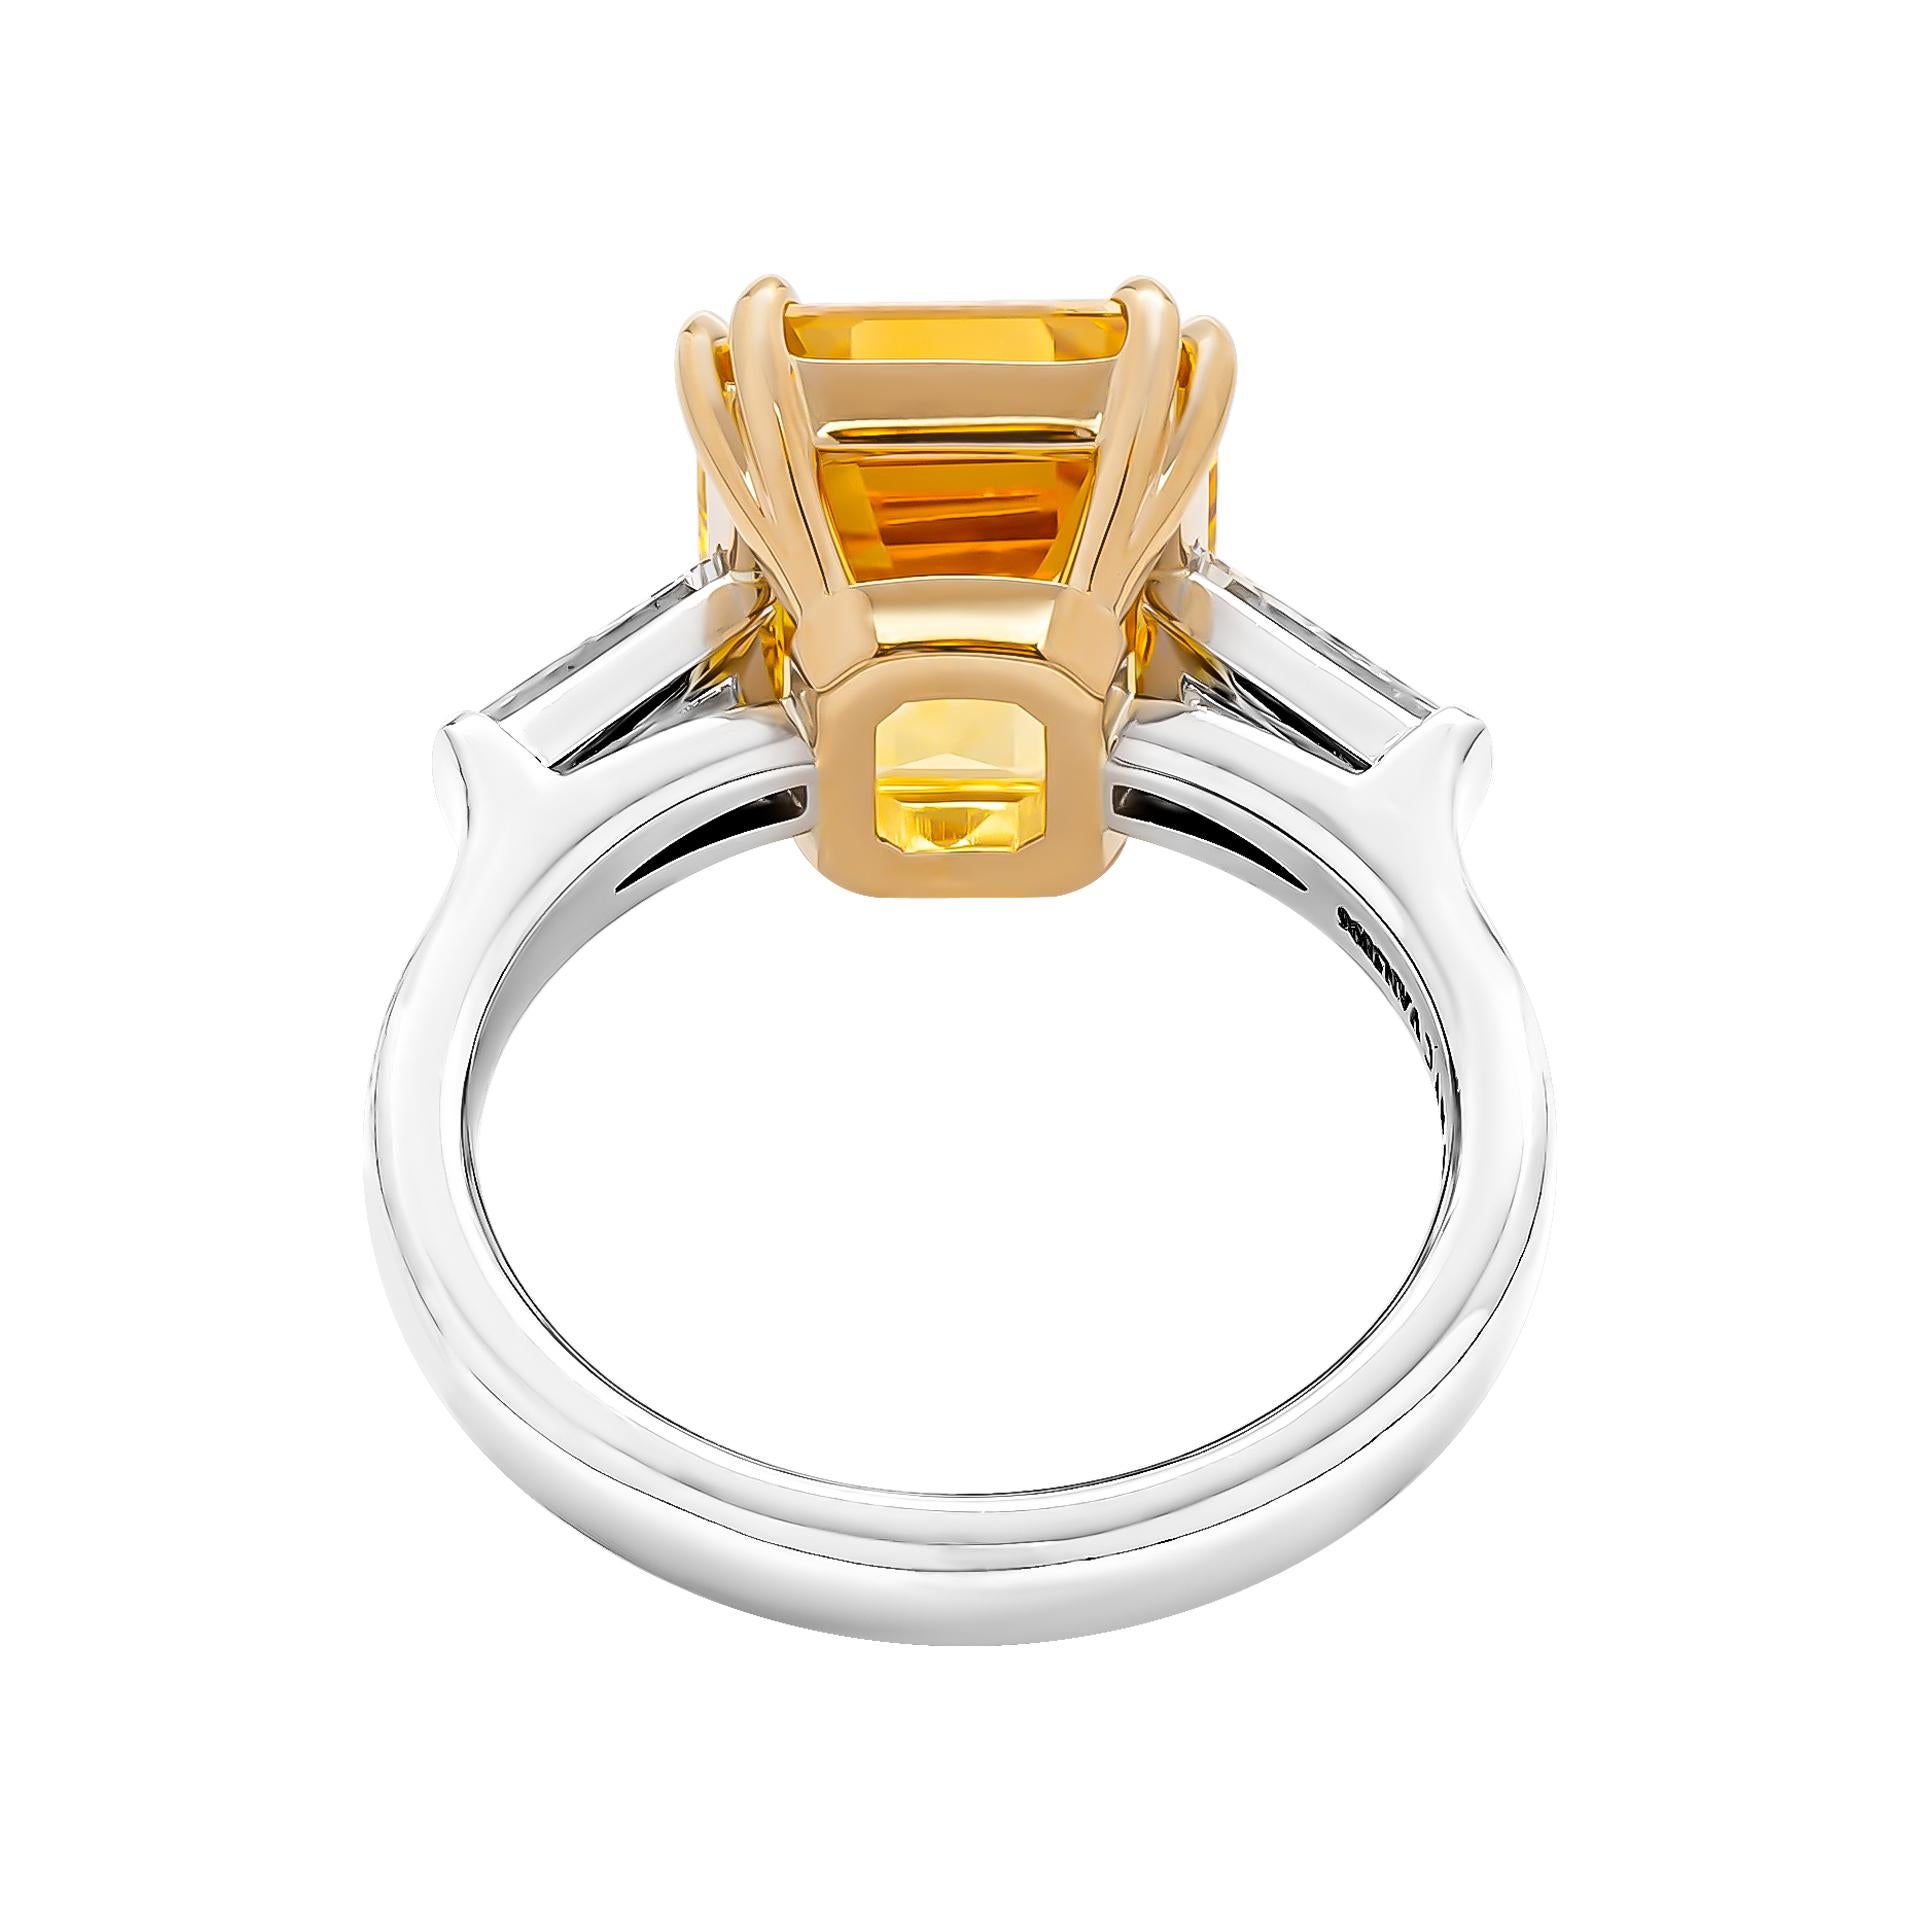 Modern Certified 3 Stone Ring with 7.04ct Vivid Yellow Emerald Cut Sapphire For Sale